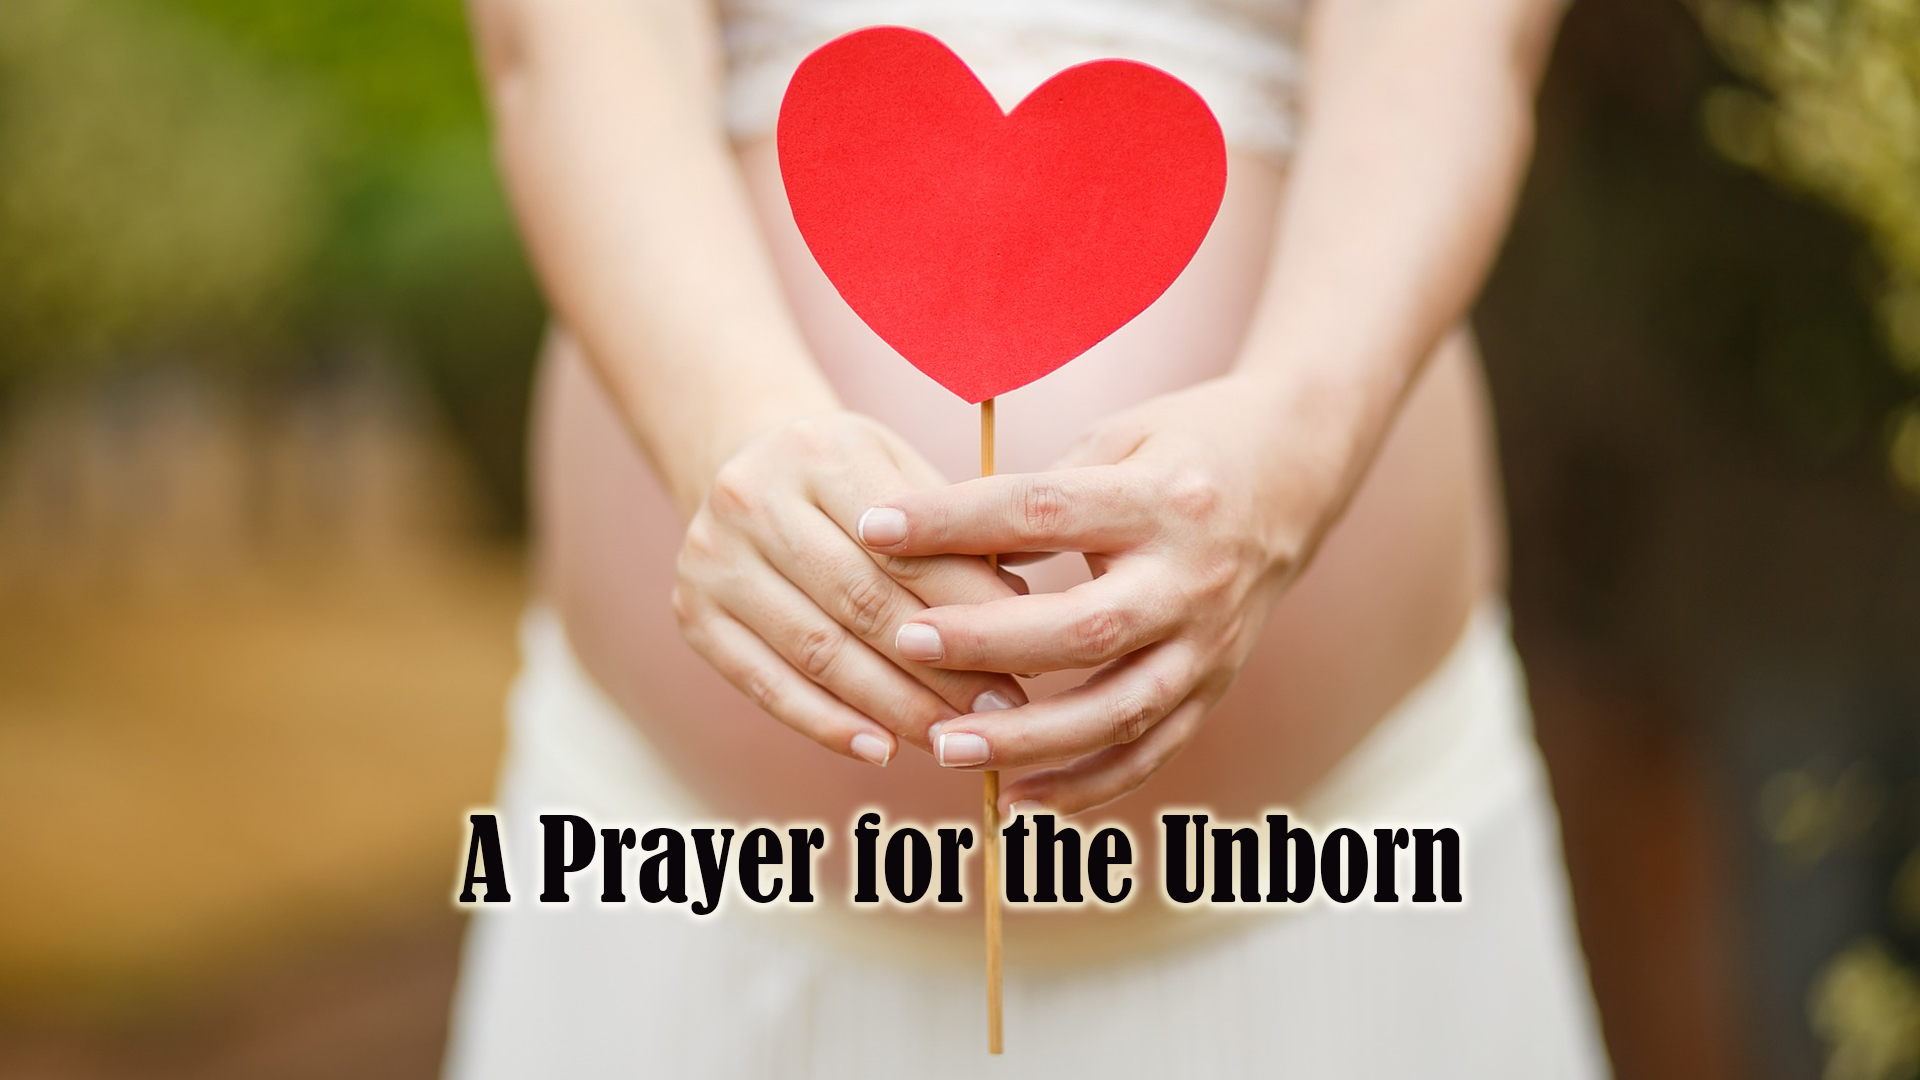 A Prayer for the Unborn